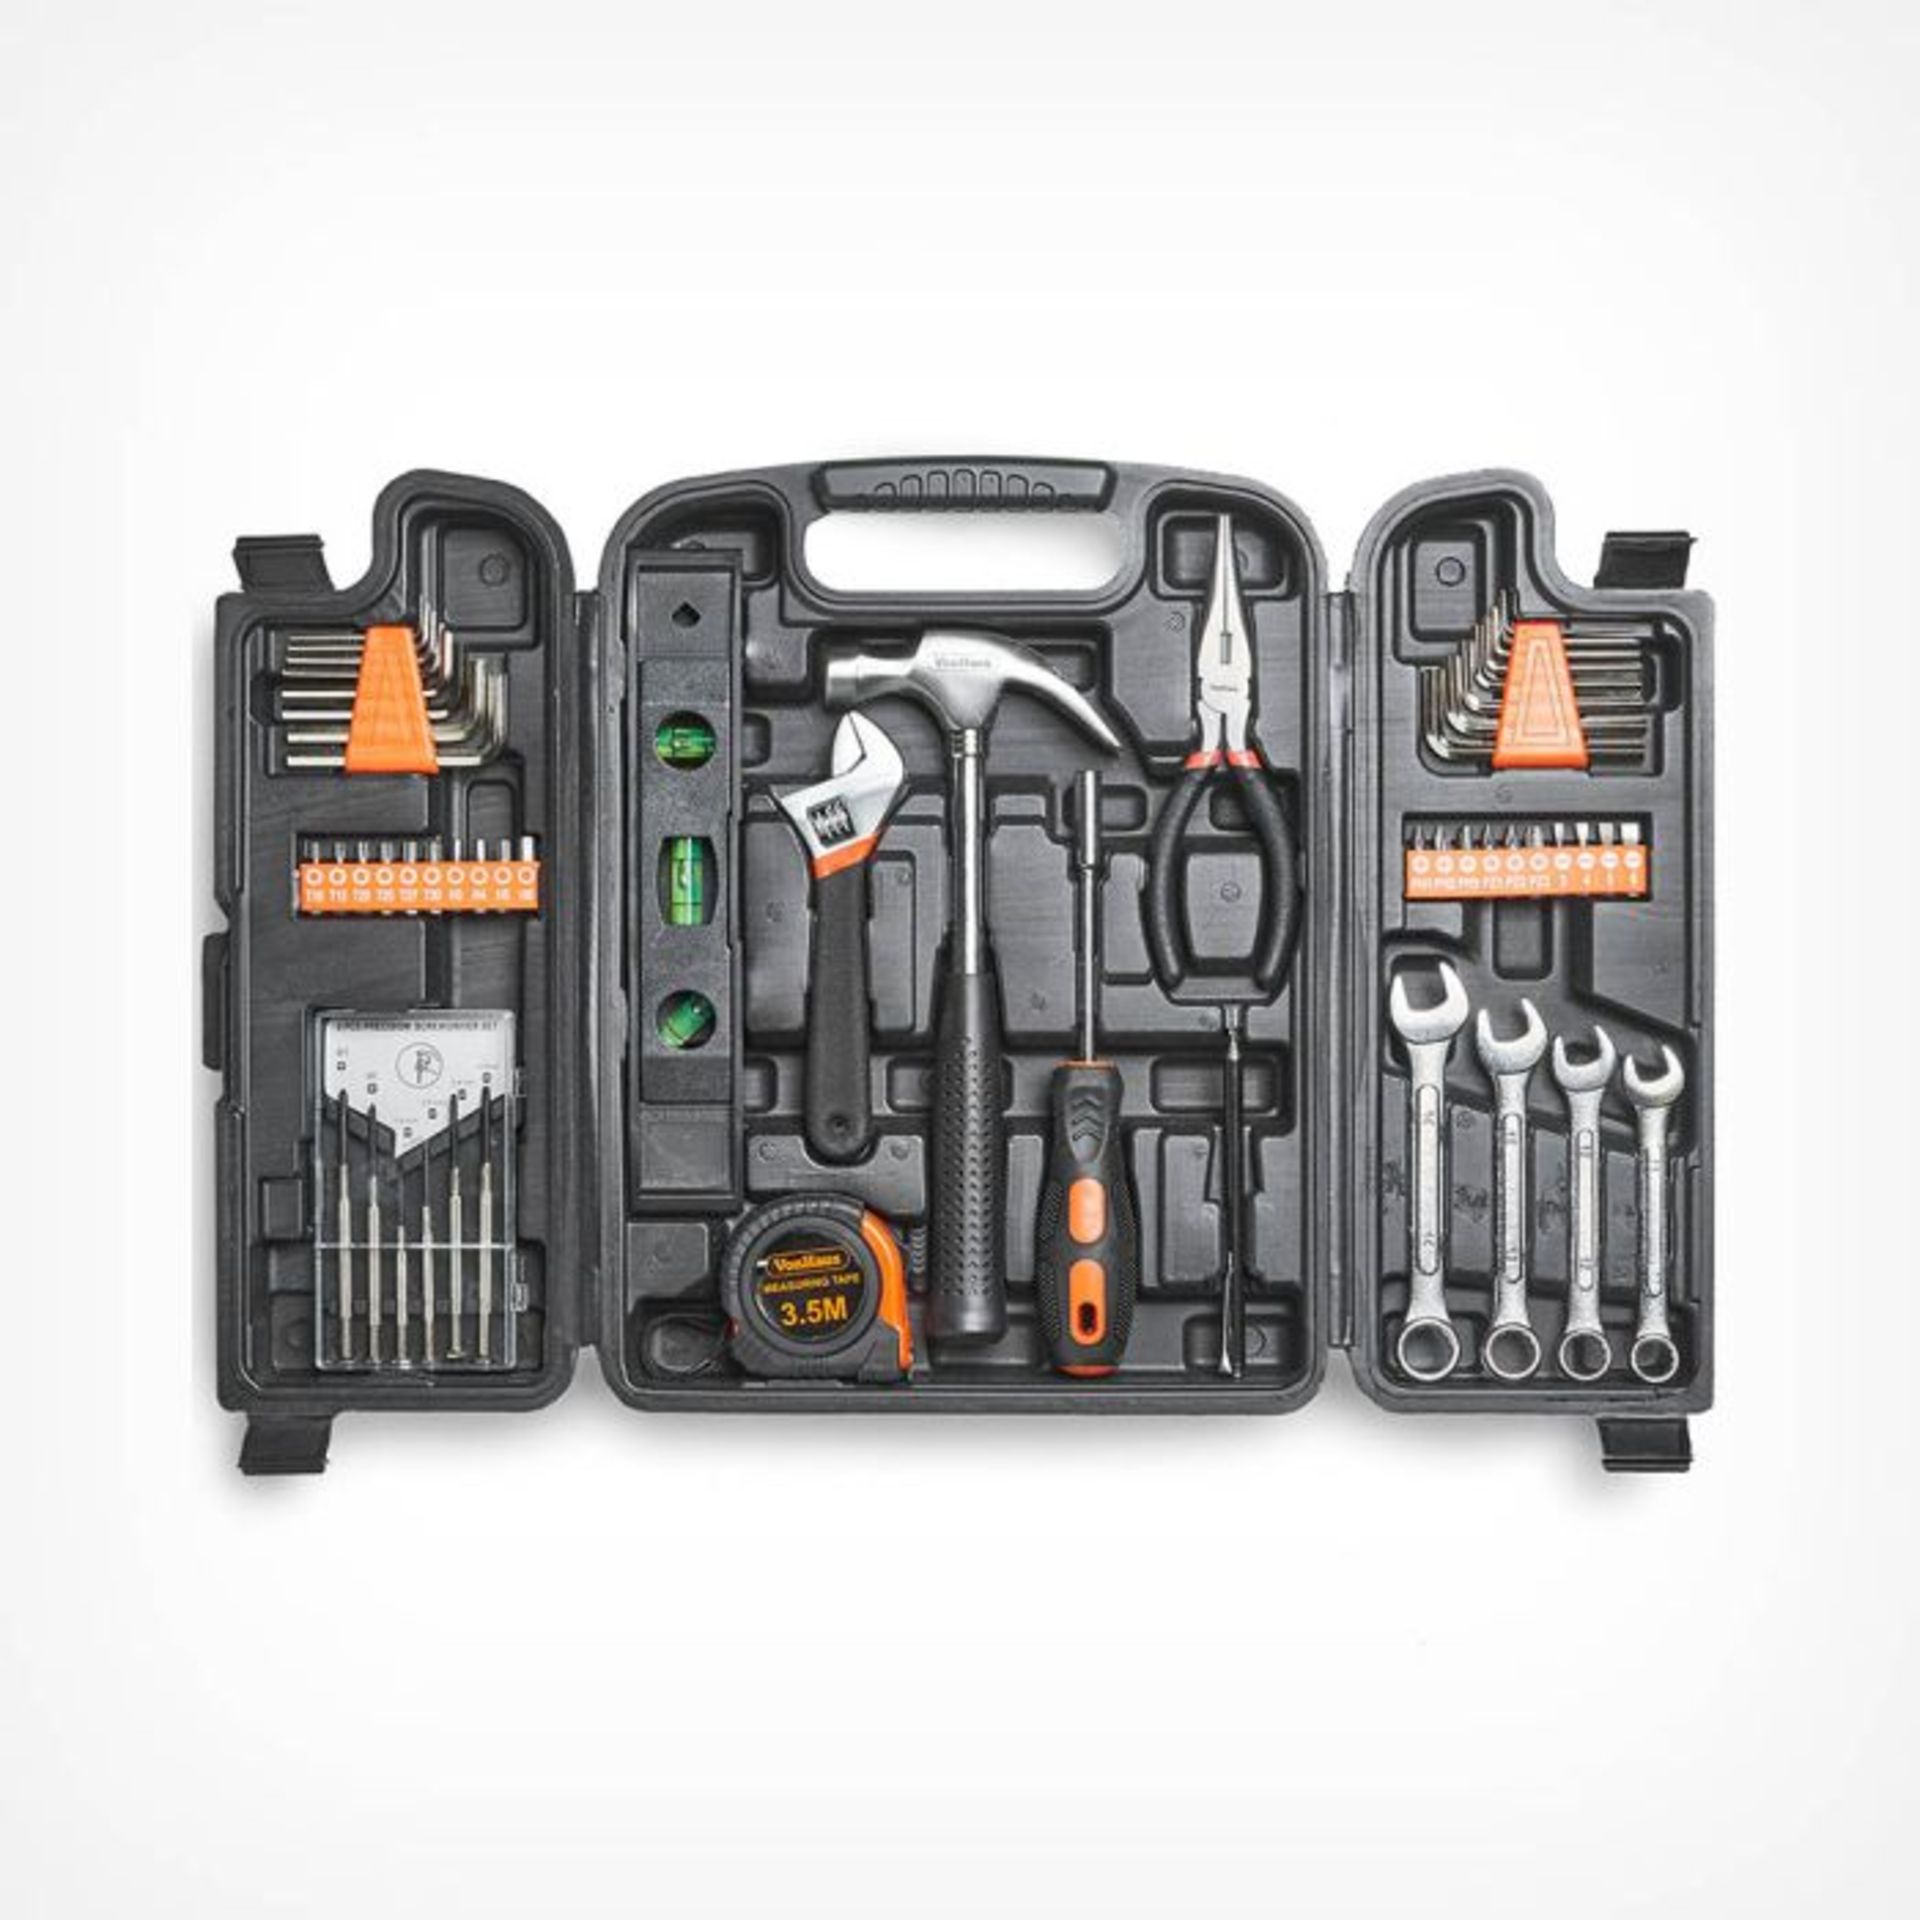 53pc Household Tool Set. - ER35. Made from hardwearing steel, the hand tools are ergonomically